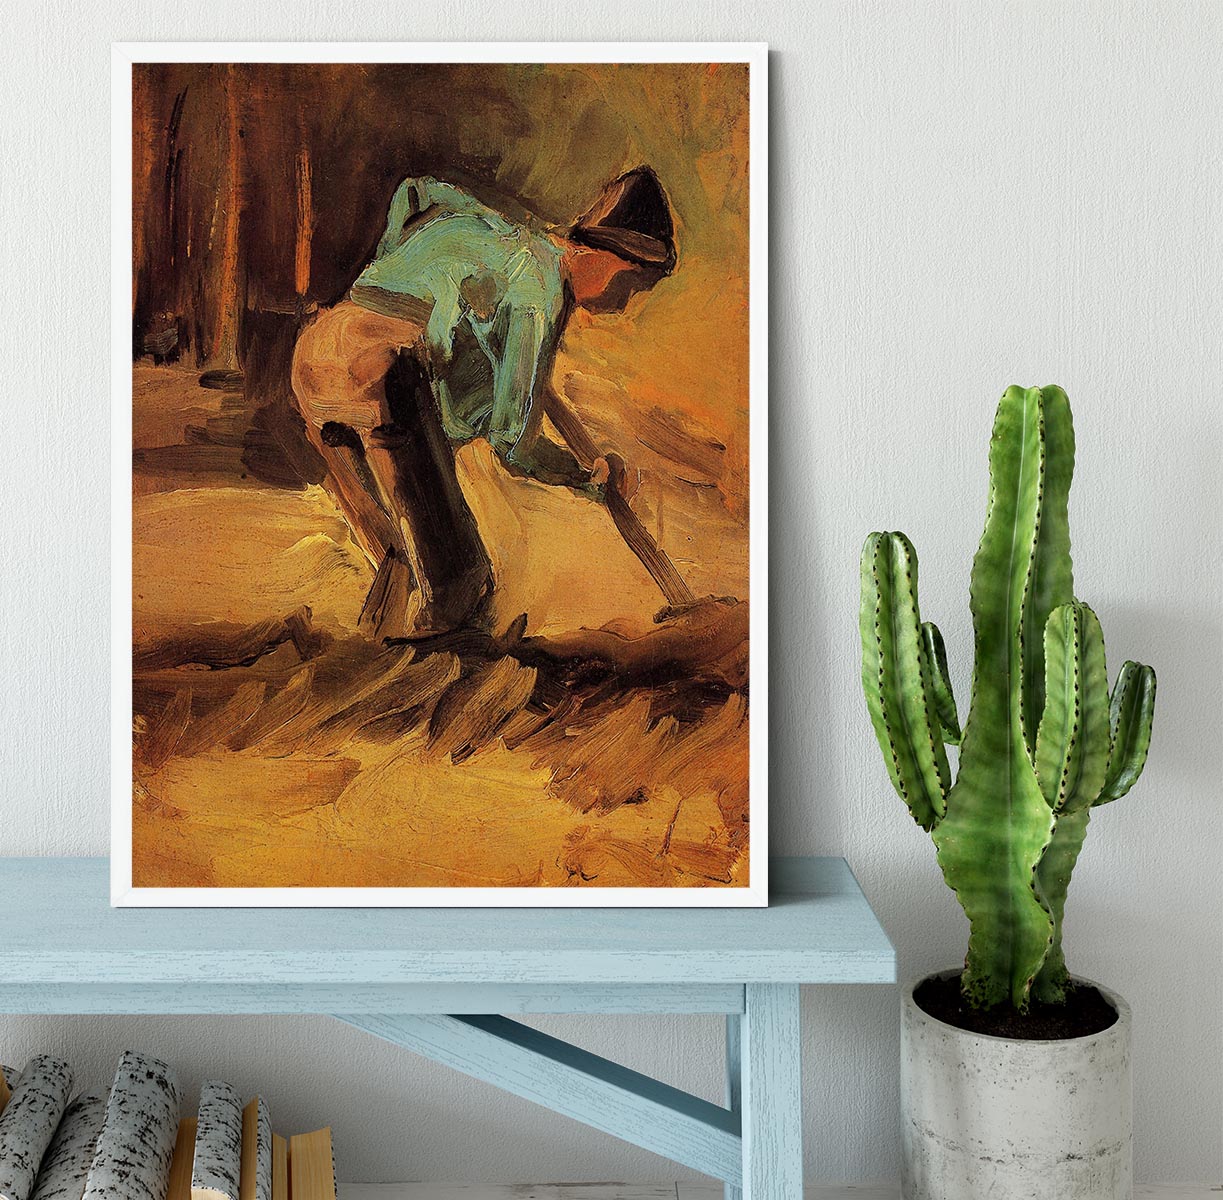 Man Stooping with Stick or Spade by Van Gogh Framed Print - Canvas Art Rocks -6